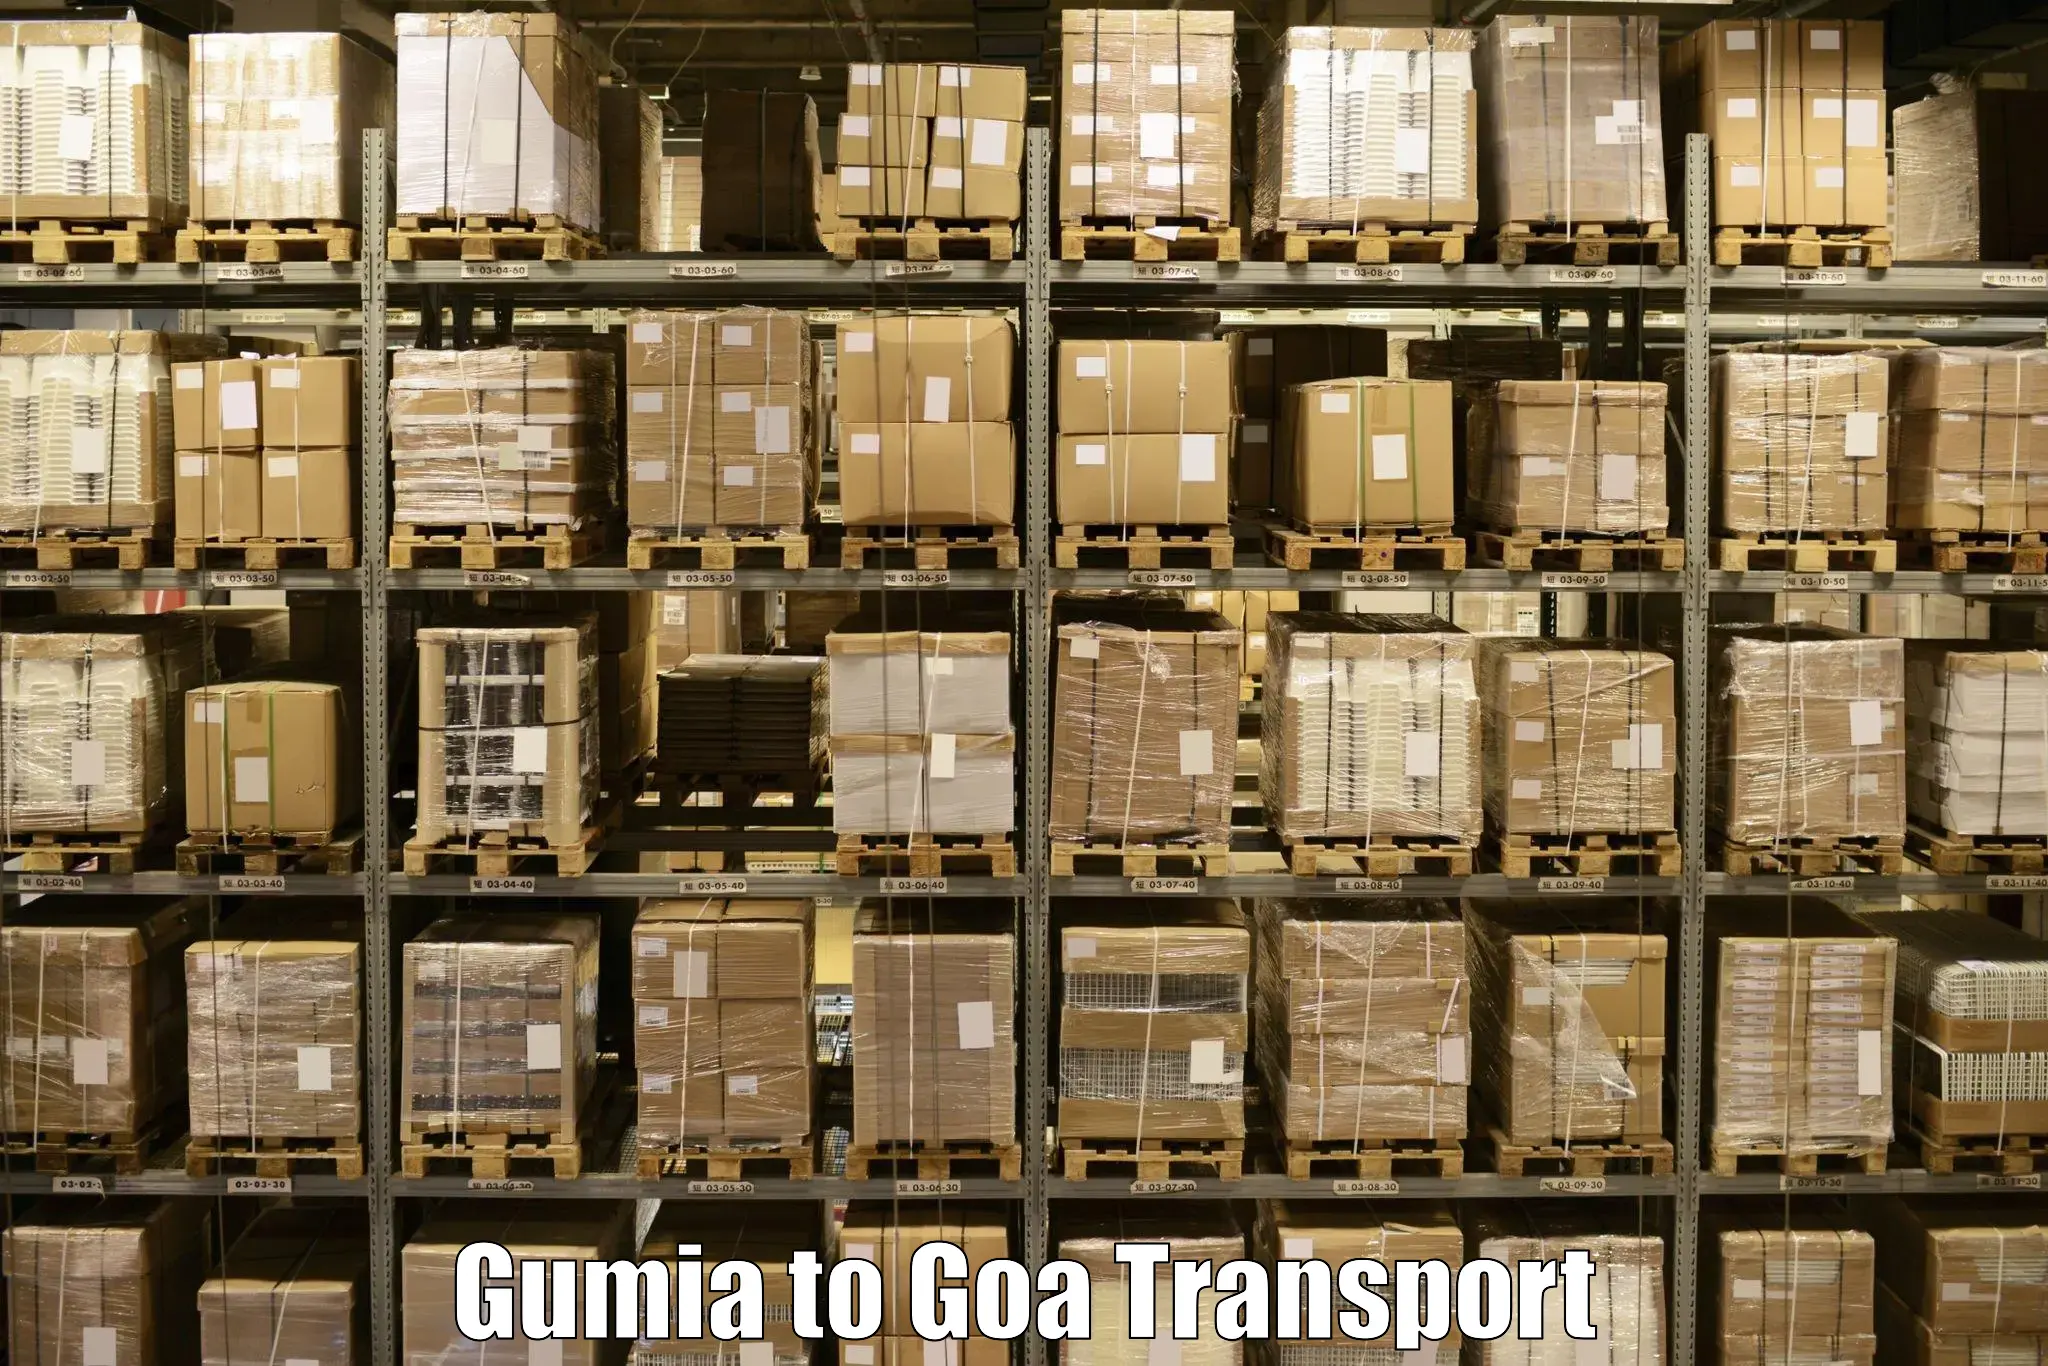 Pick up transport service Gumia to South Goa